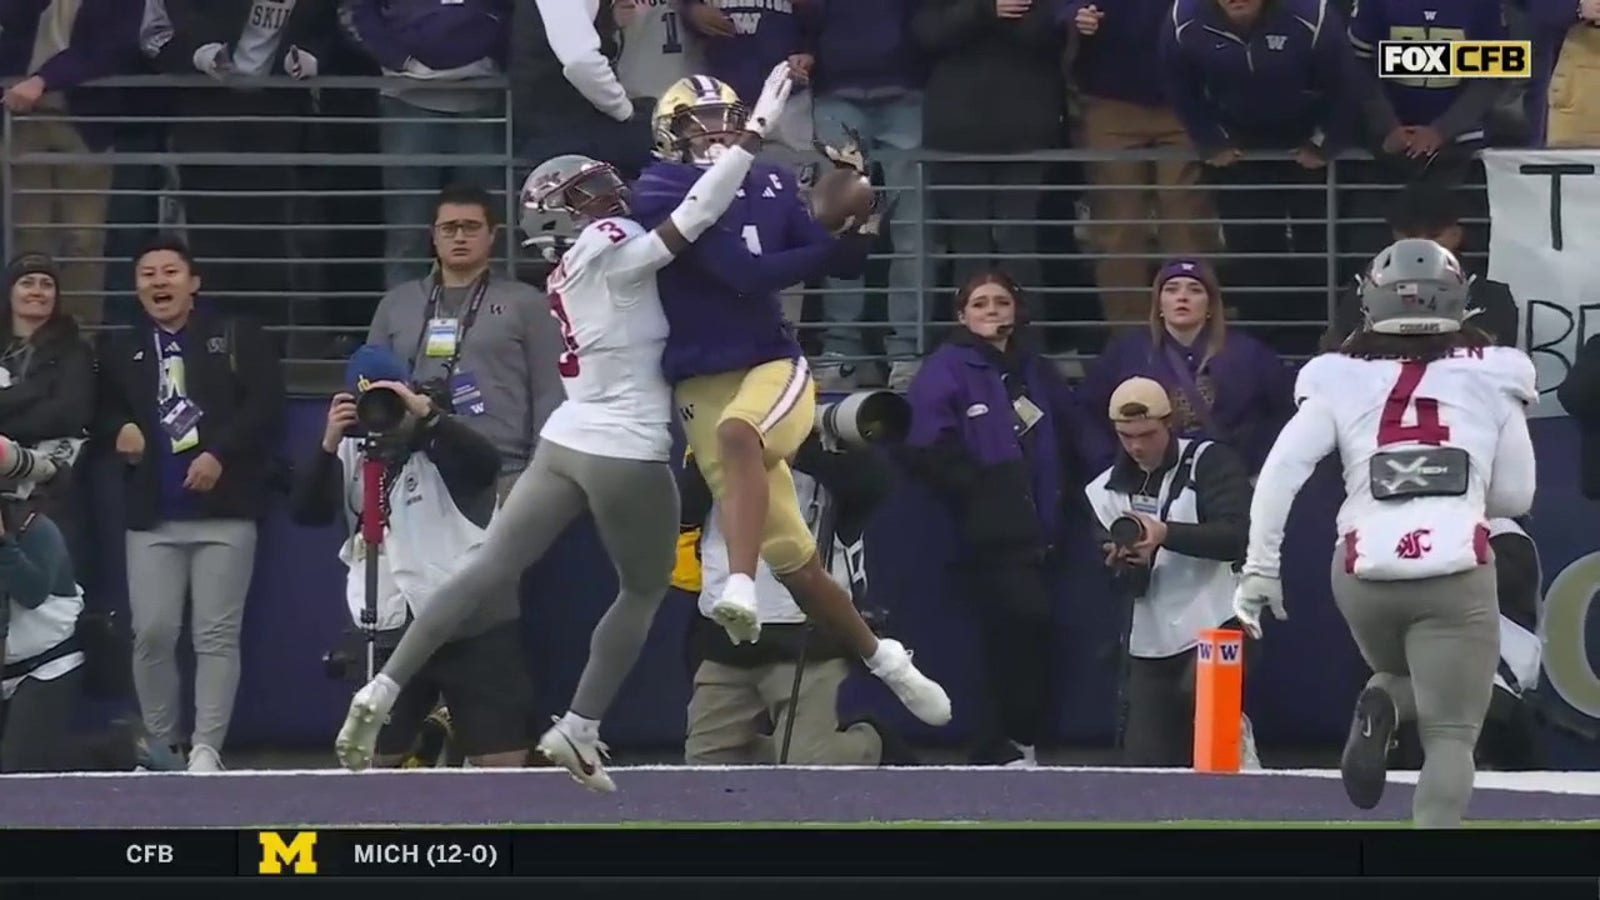 Rome Odunze hauls in second TD of the game to give Washington the lead against Washington State